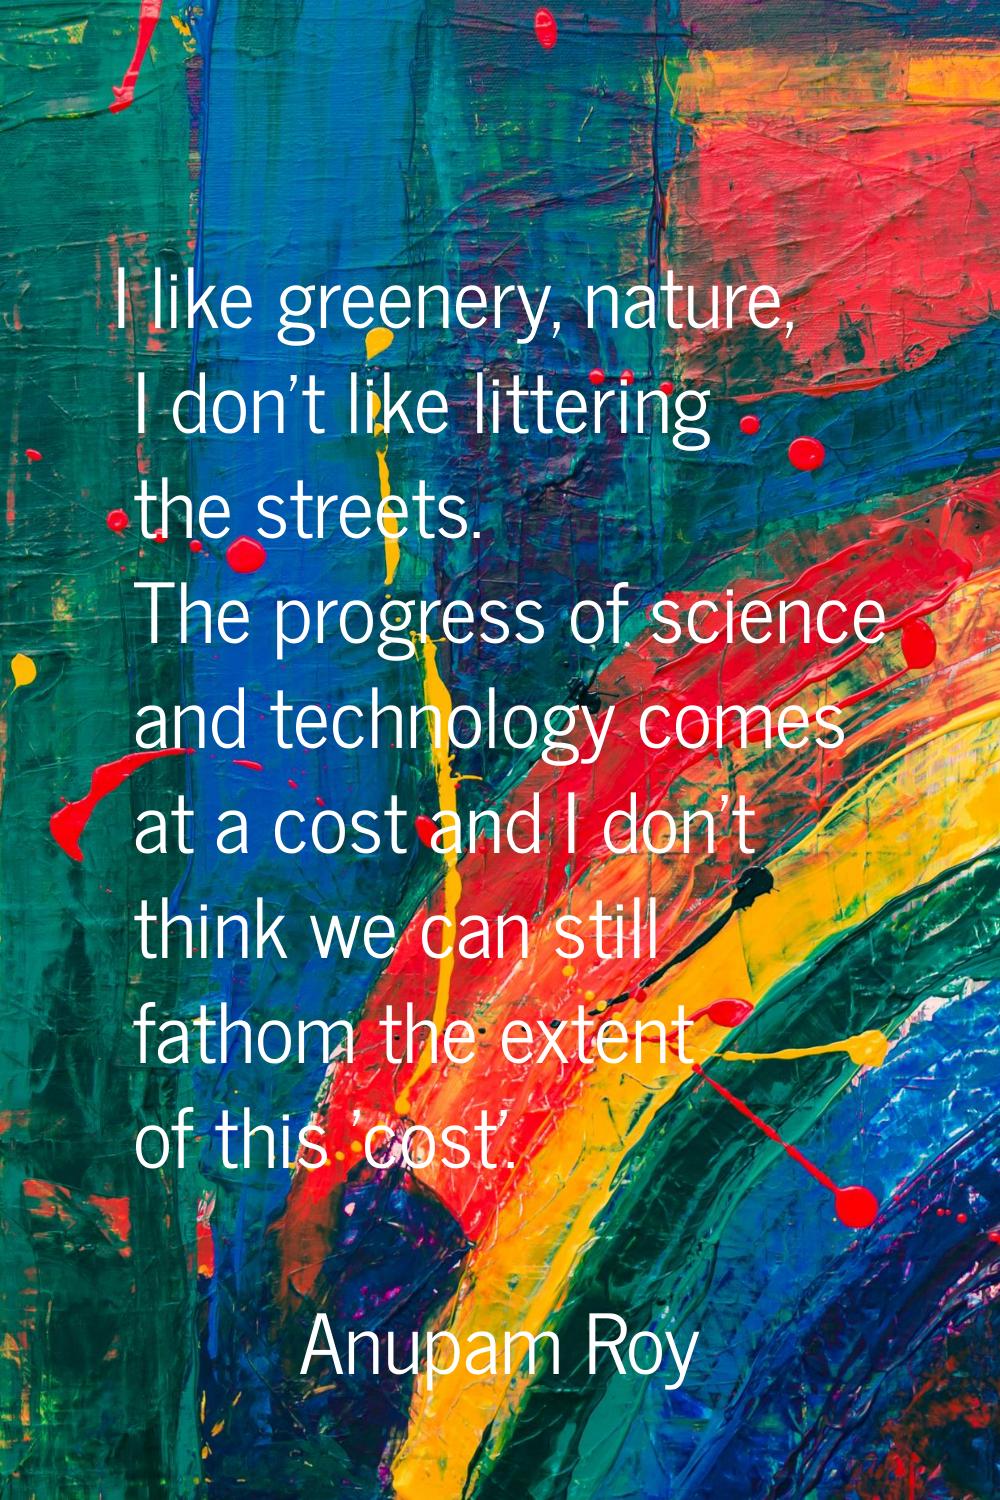 I like greenery, nature, I don't like littering the streets. The progress of science and technology